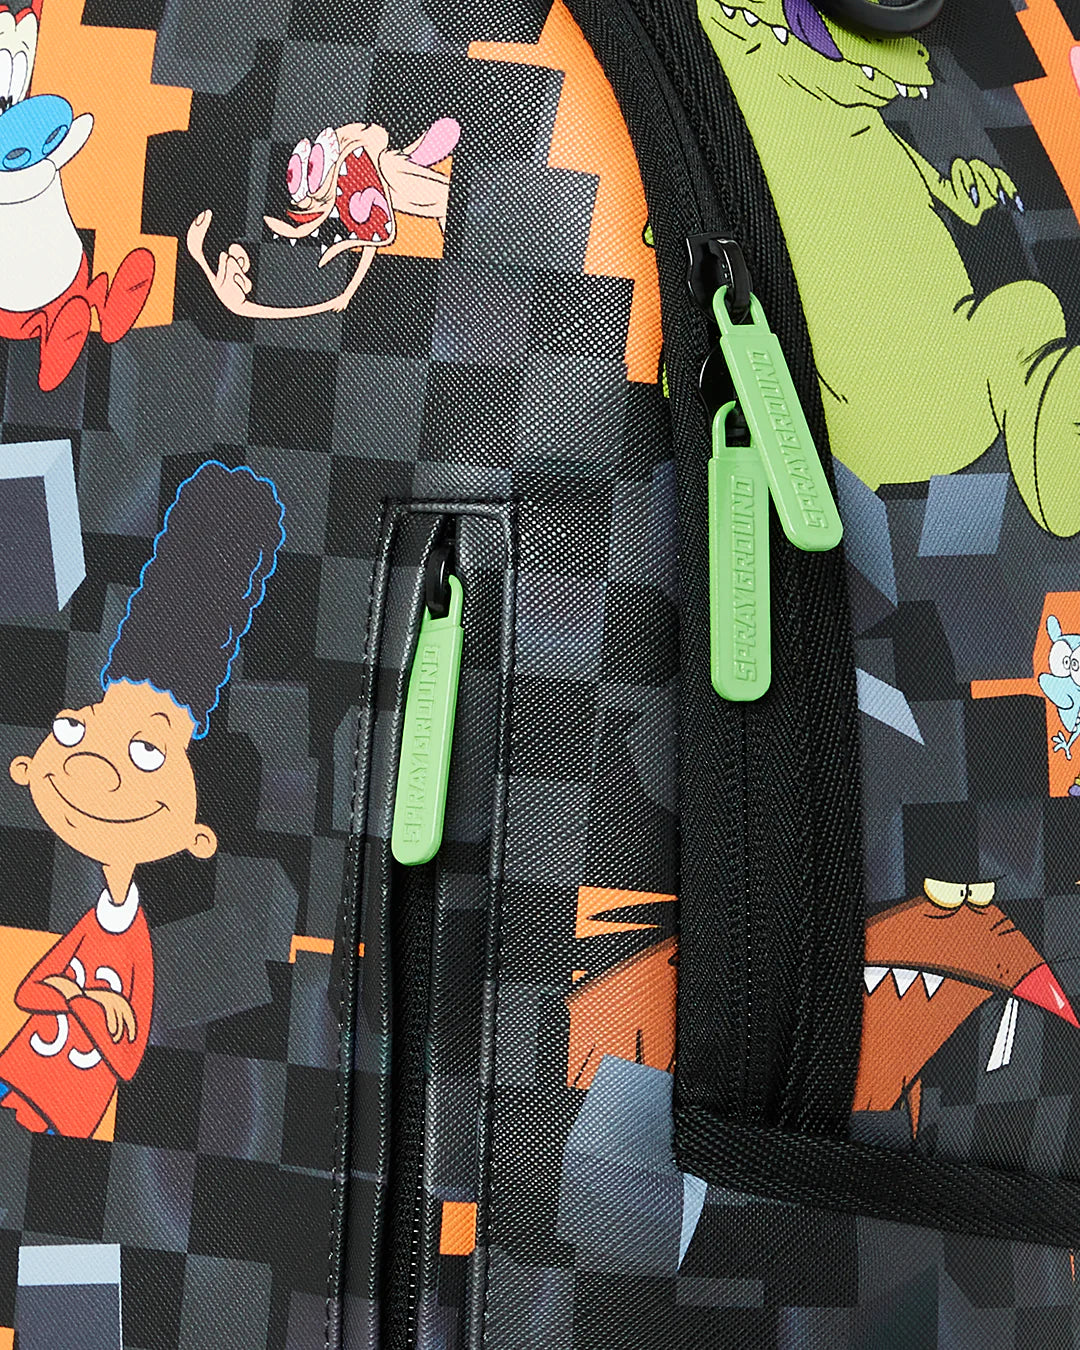 Nicktoons Brust Through Checkers Backpack